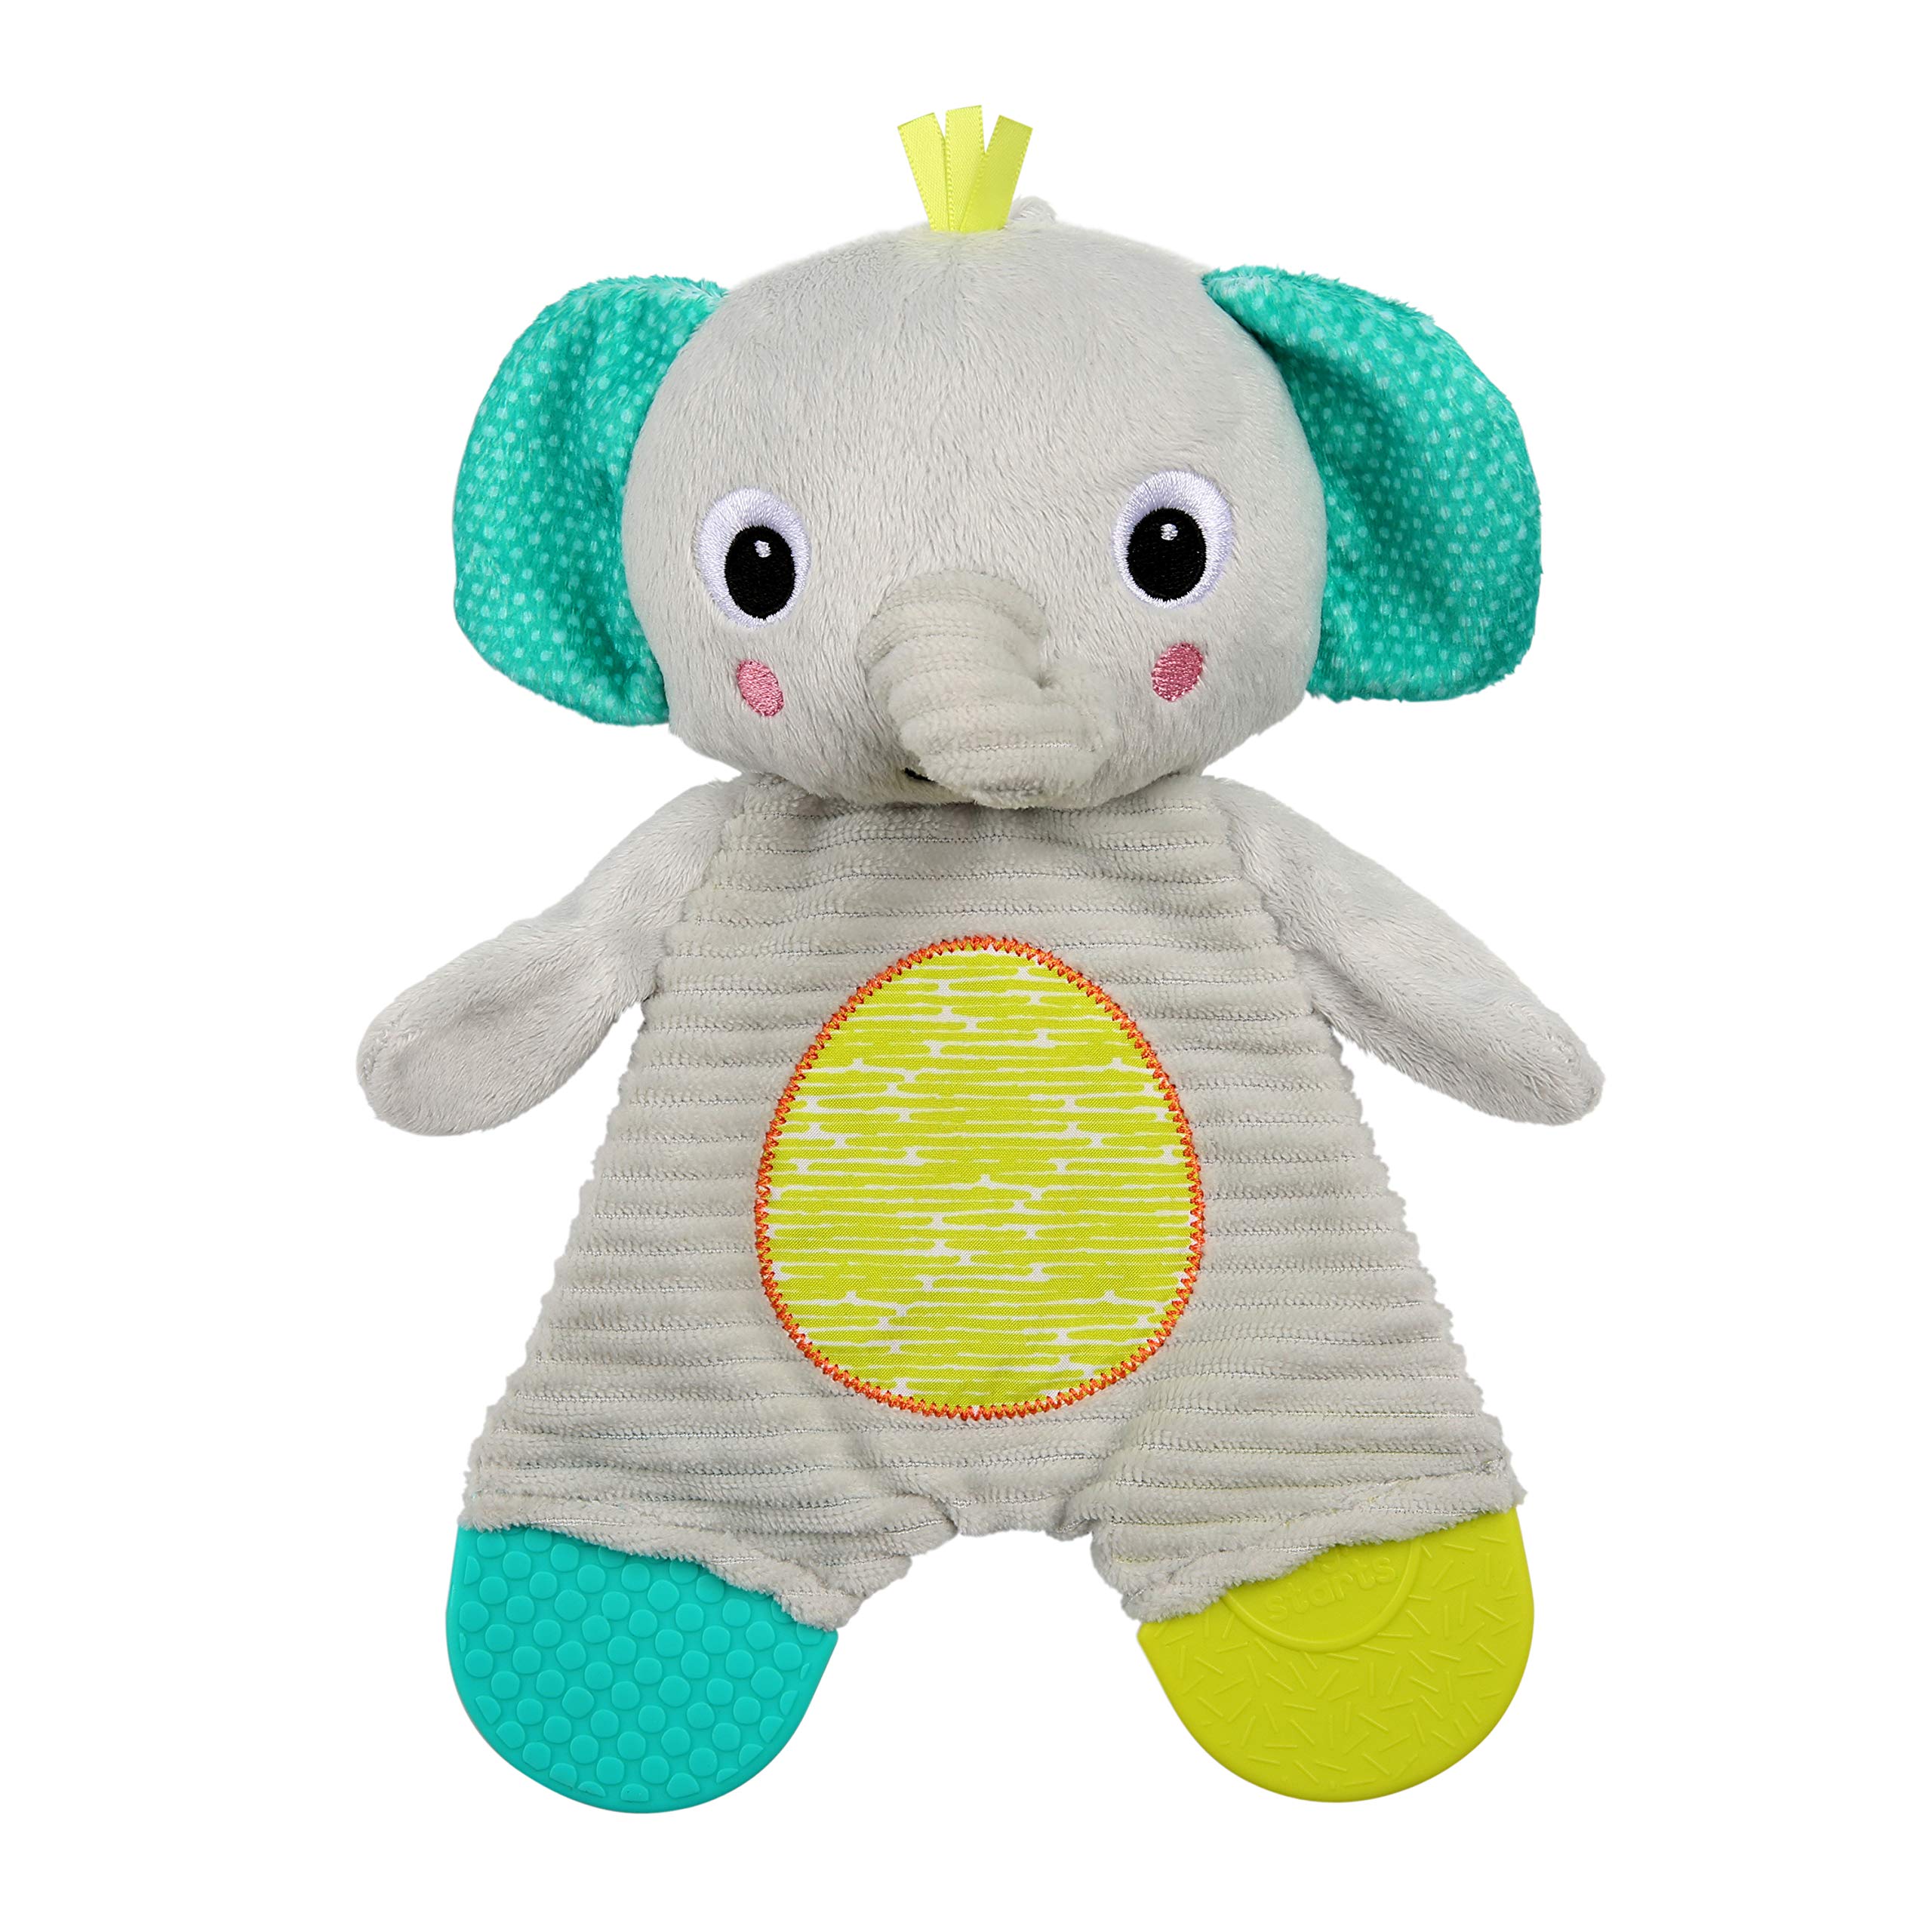 Book Cover Bright Starts Snuggle & Teethe Plush Teether Toy - Elephant or Giraffe Assorted (1pc, Style May Vary), Ages Newborn+